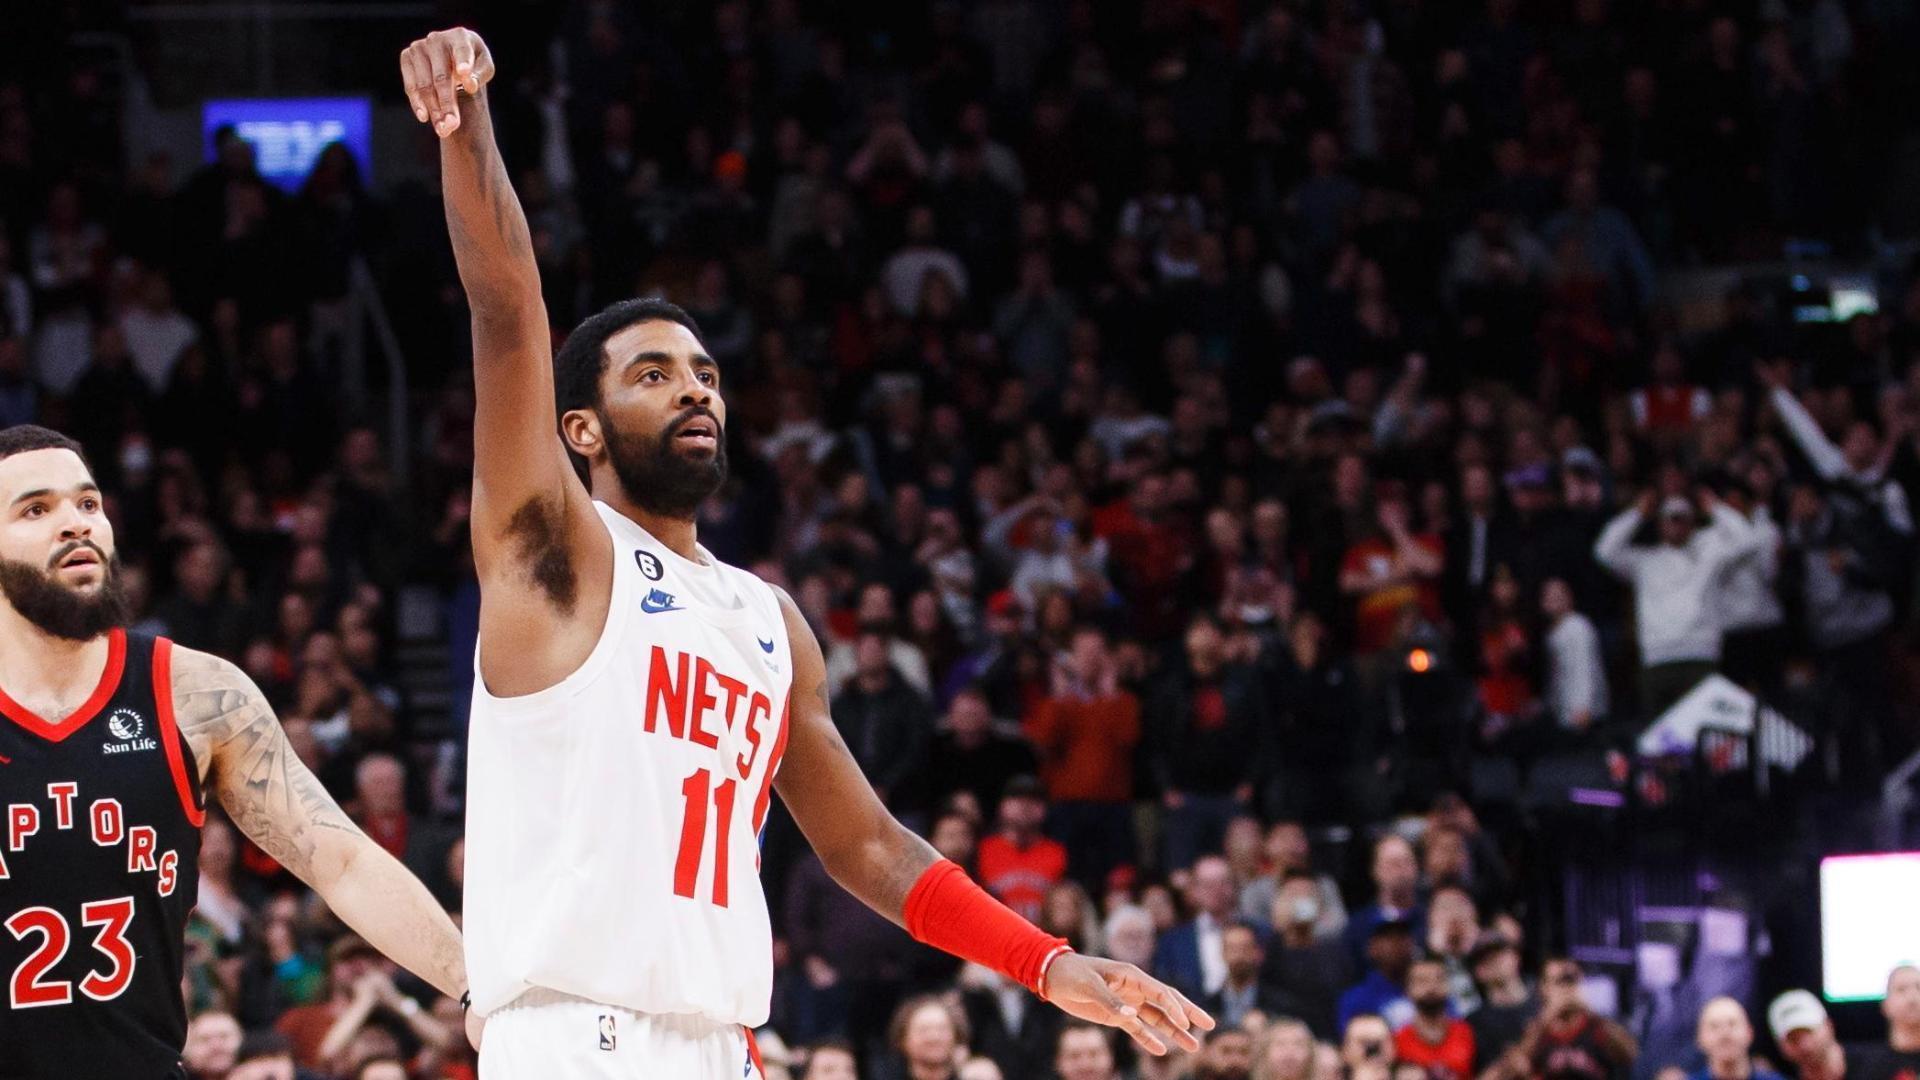 Irving buzzer-beater secures Nets' NBA win, South Coast Register